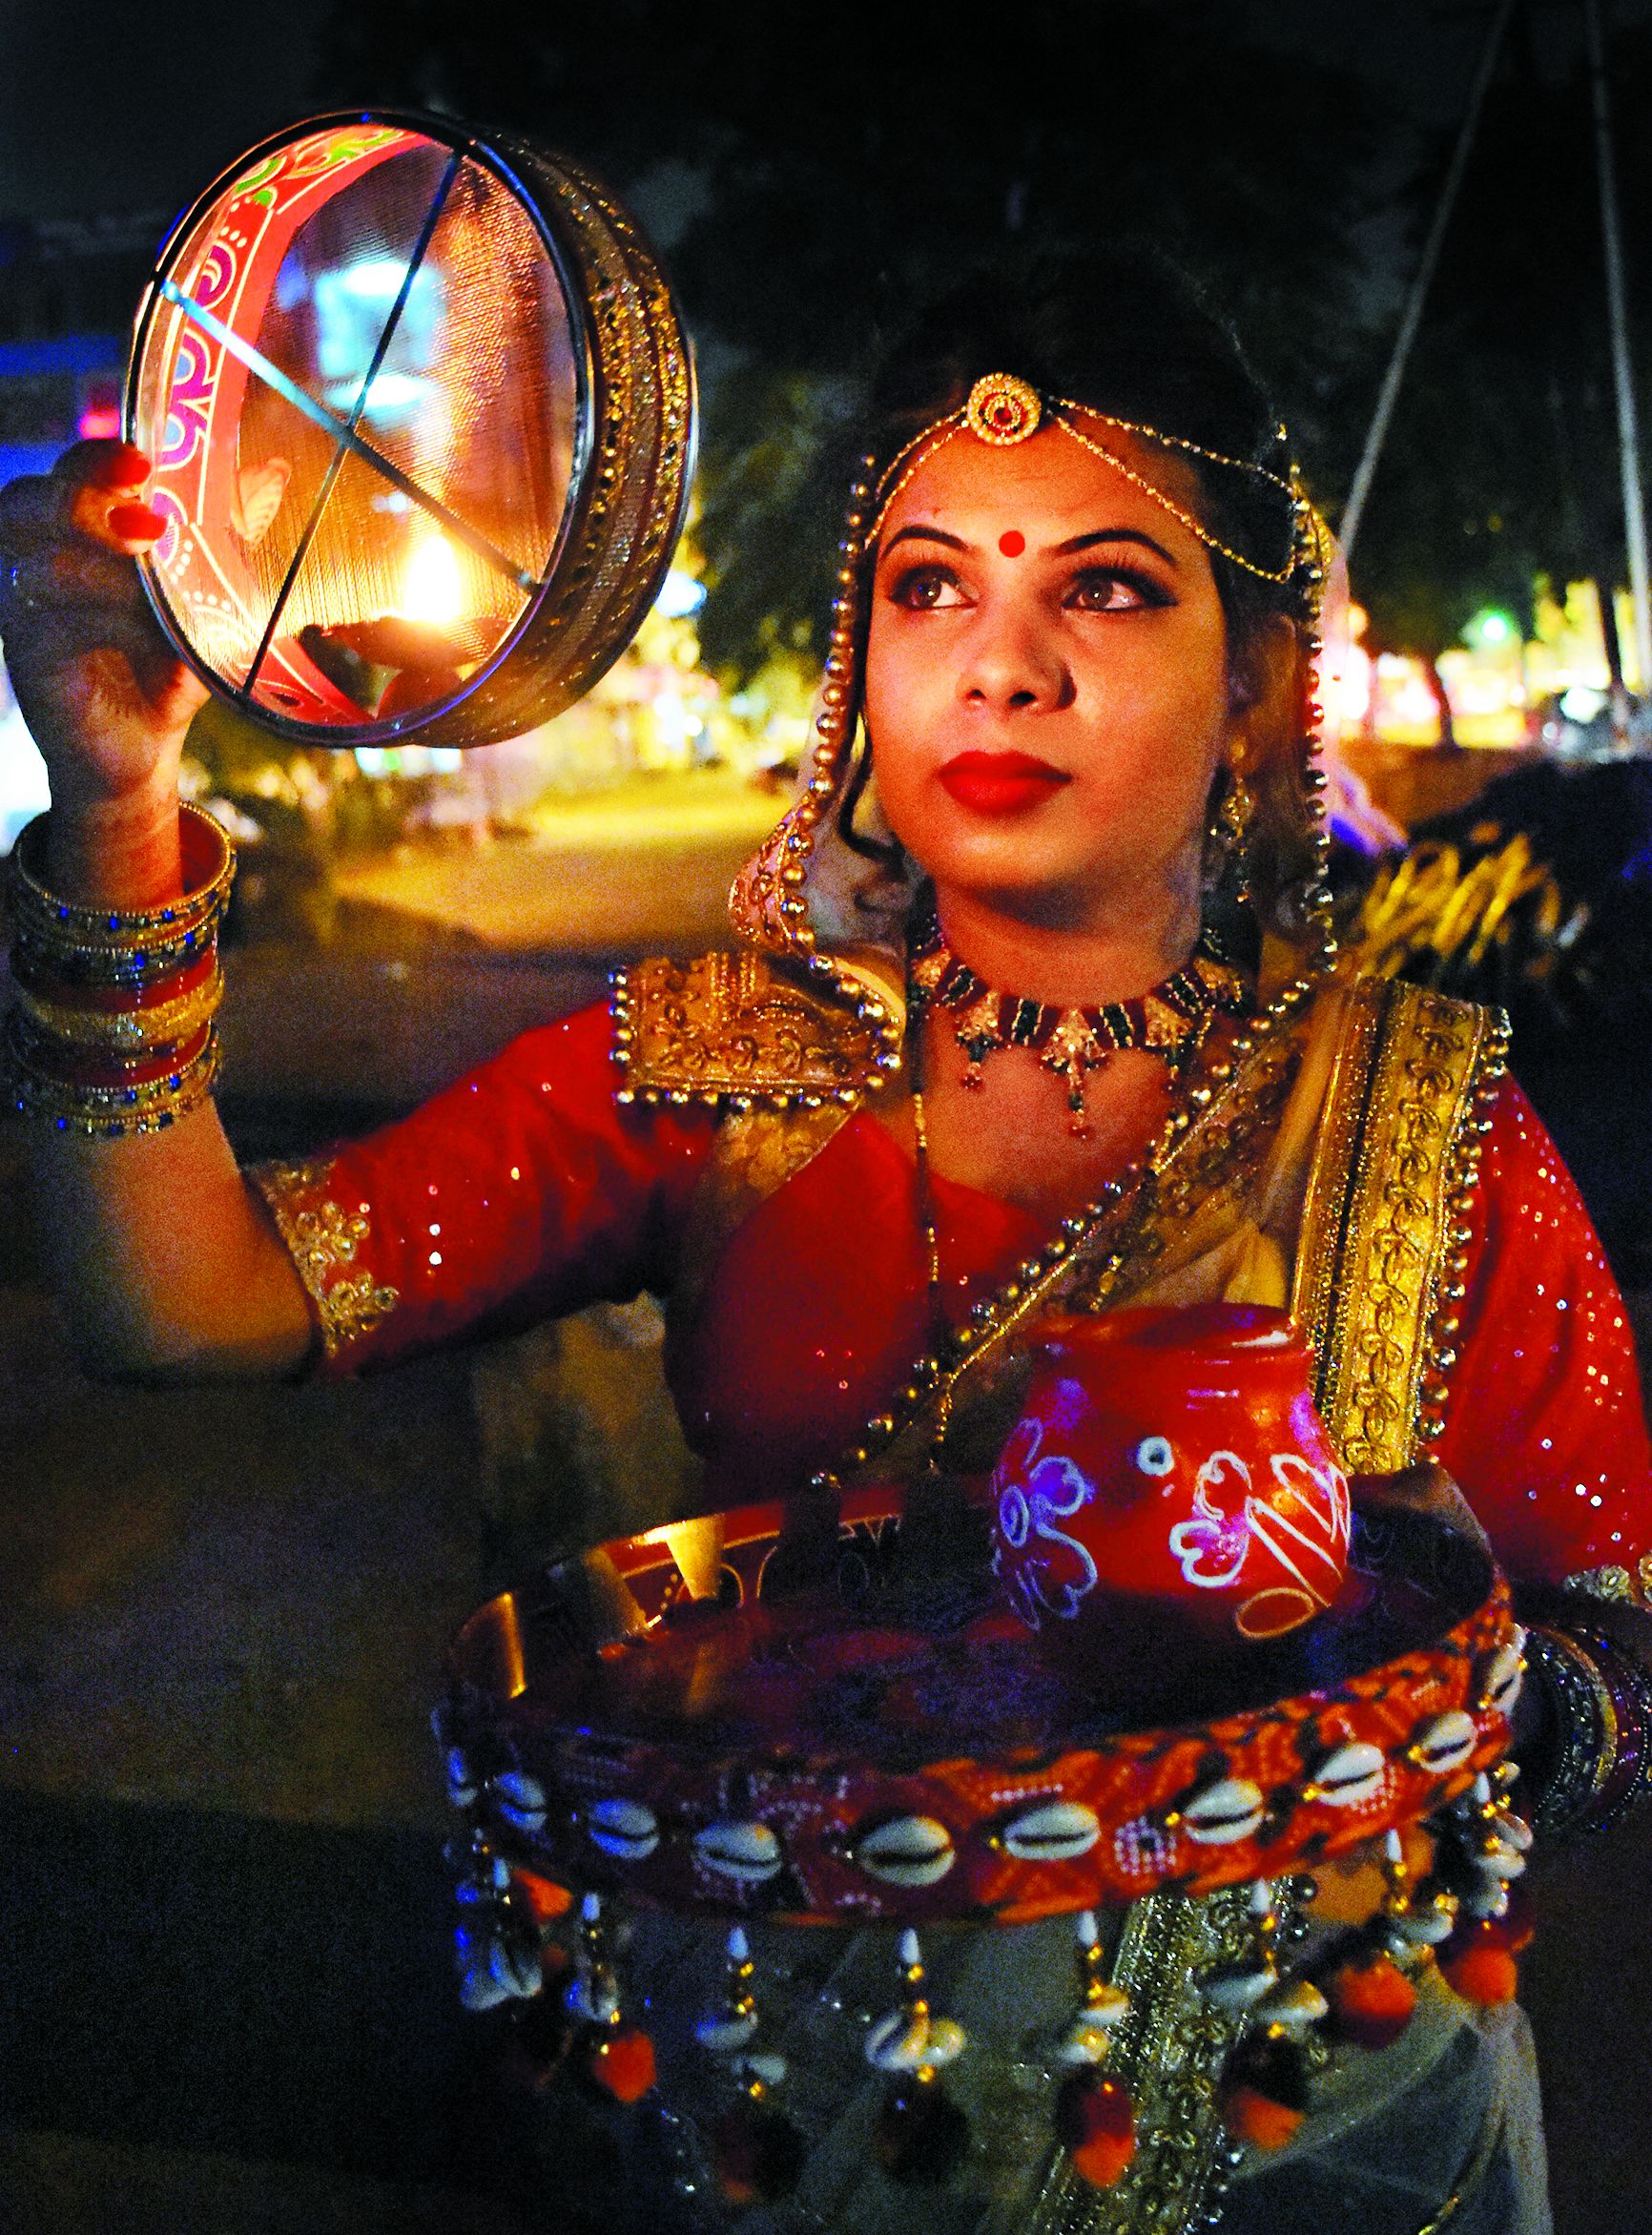 Carva chauth was celebrated in Bhopal